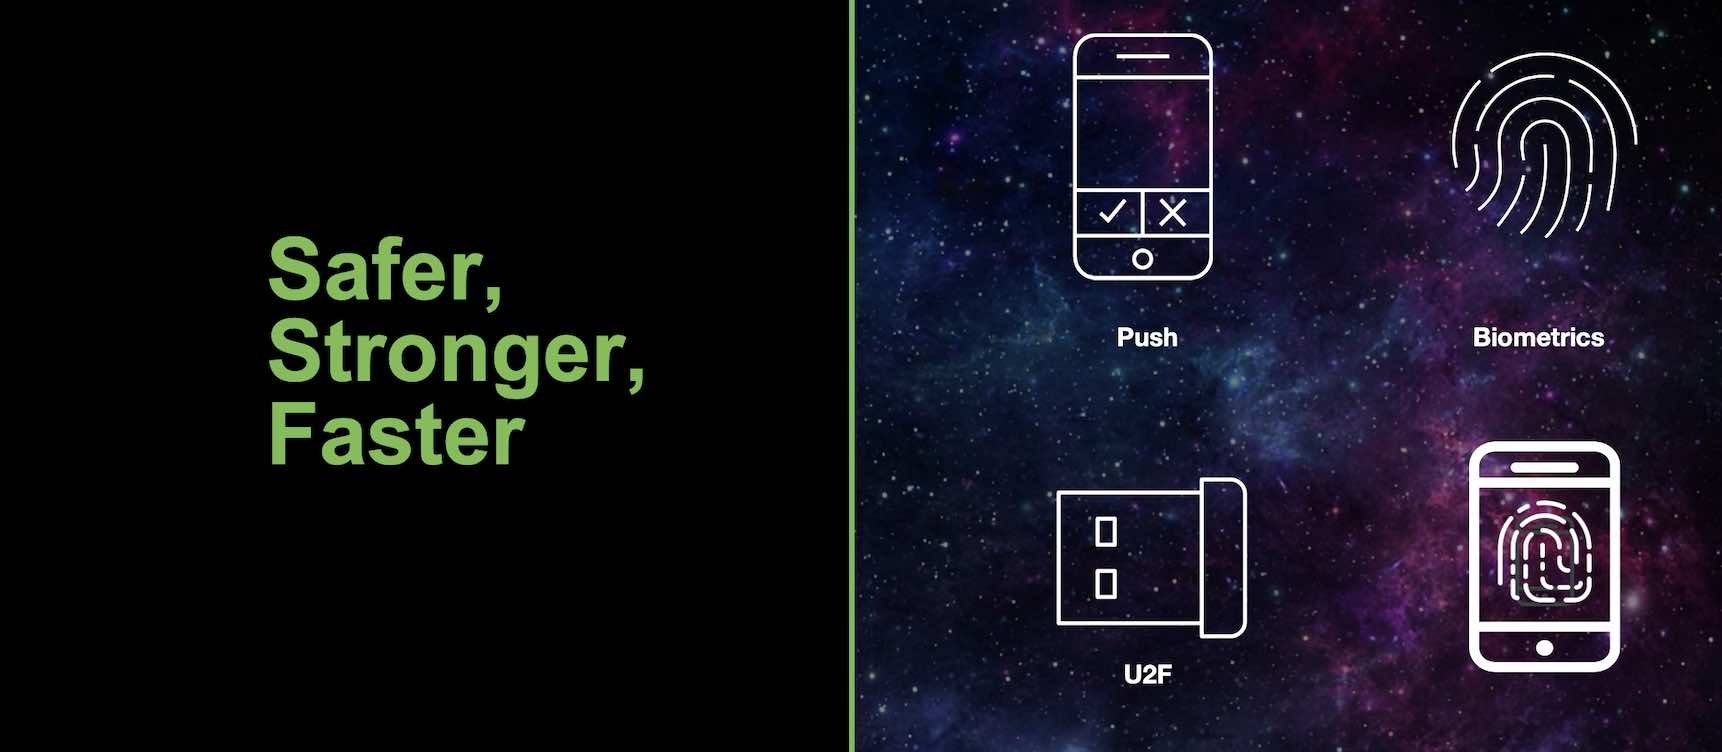 Graphic showing stronger authentication options: push, biometrics and U2F